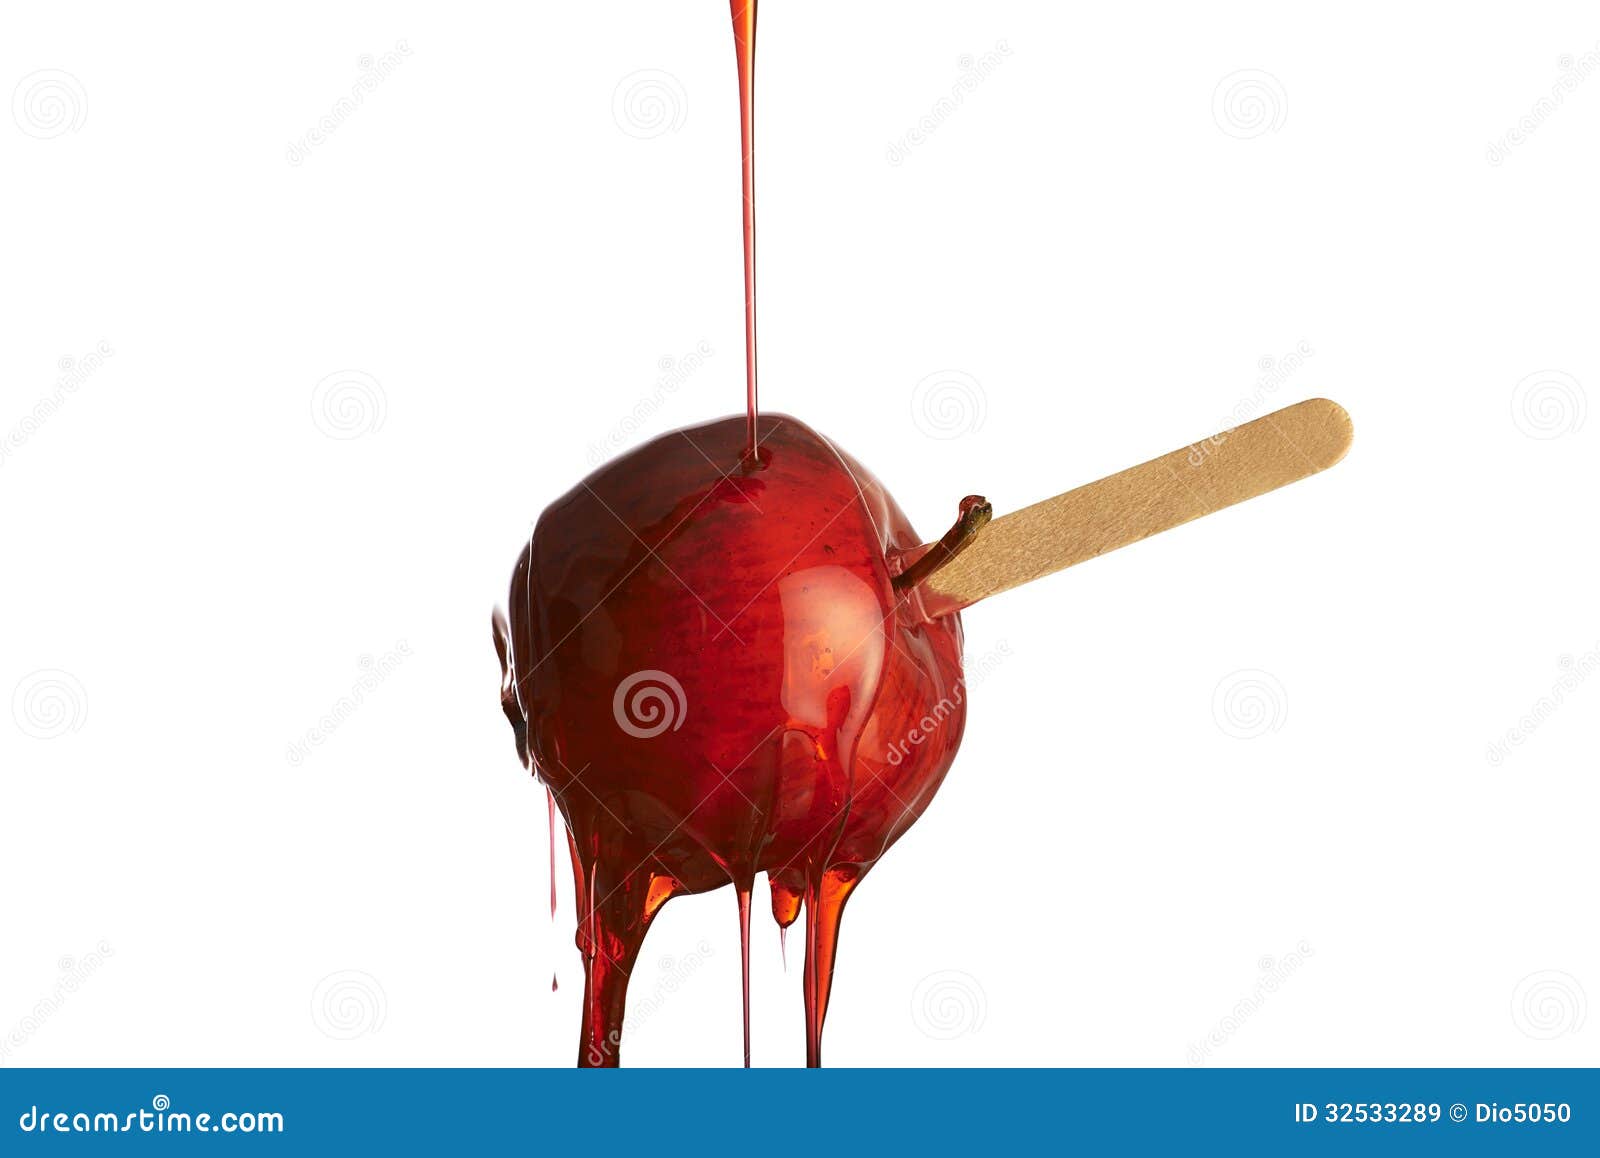 Toffee Apples Stock Image Image Of Sweet Toffee Background